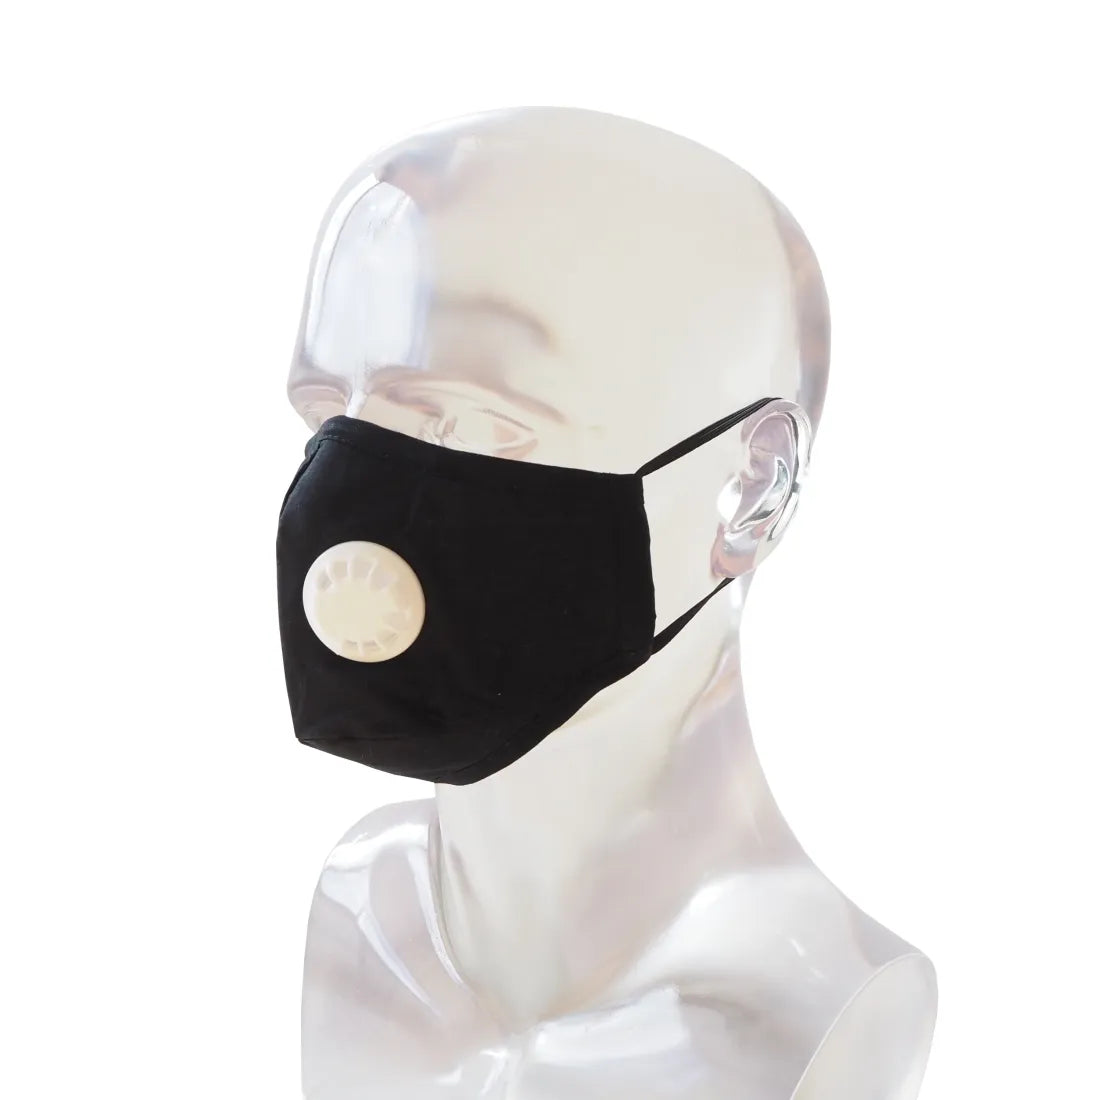 Pm 2.5 Respirator Face Mask • Black - Made In Hawaii